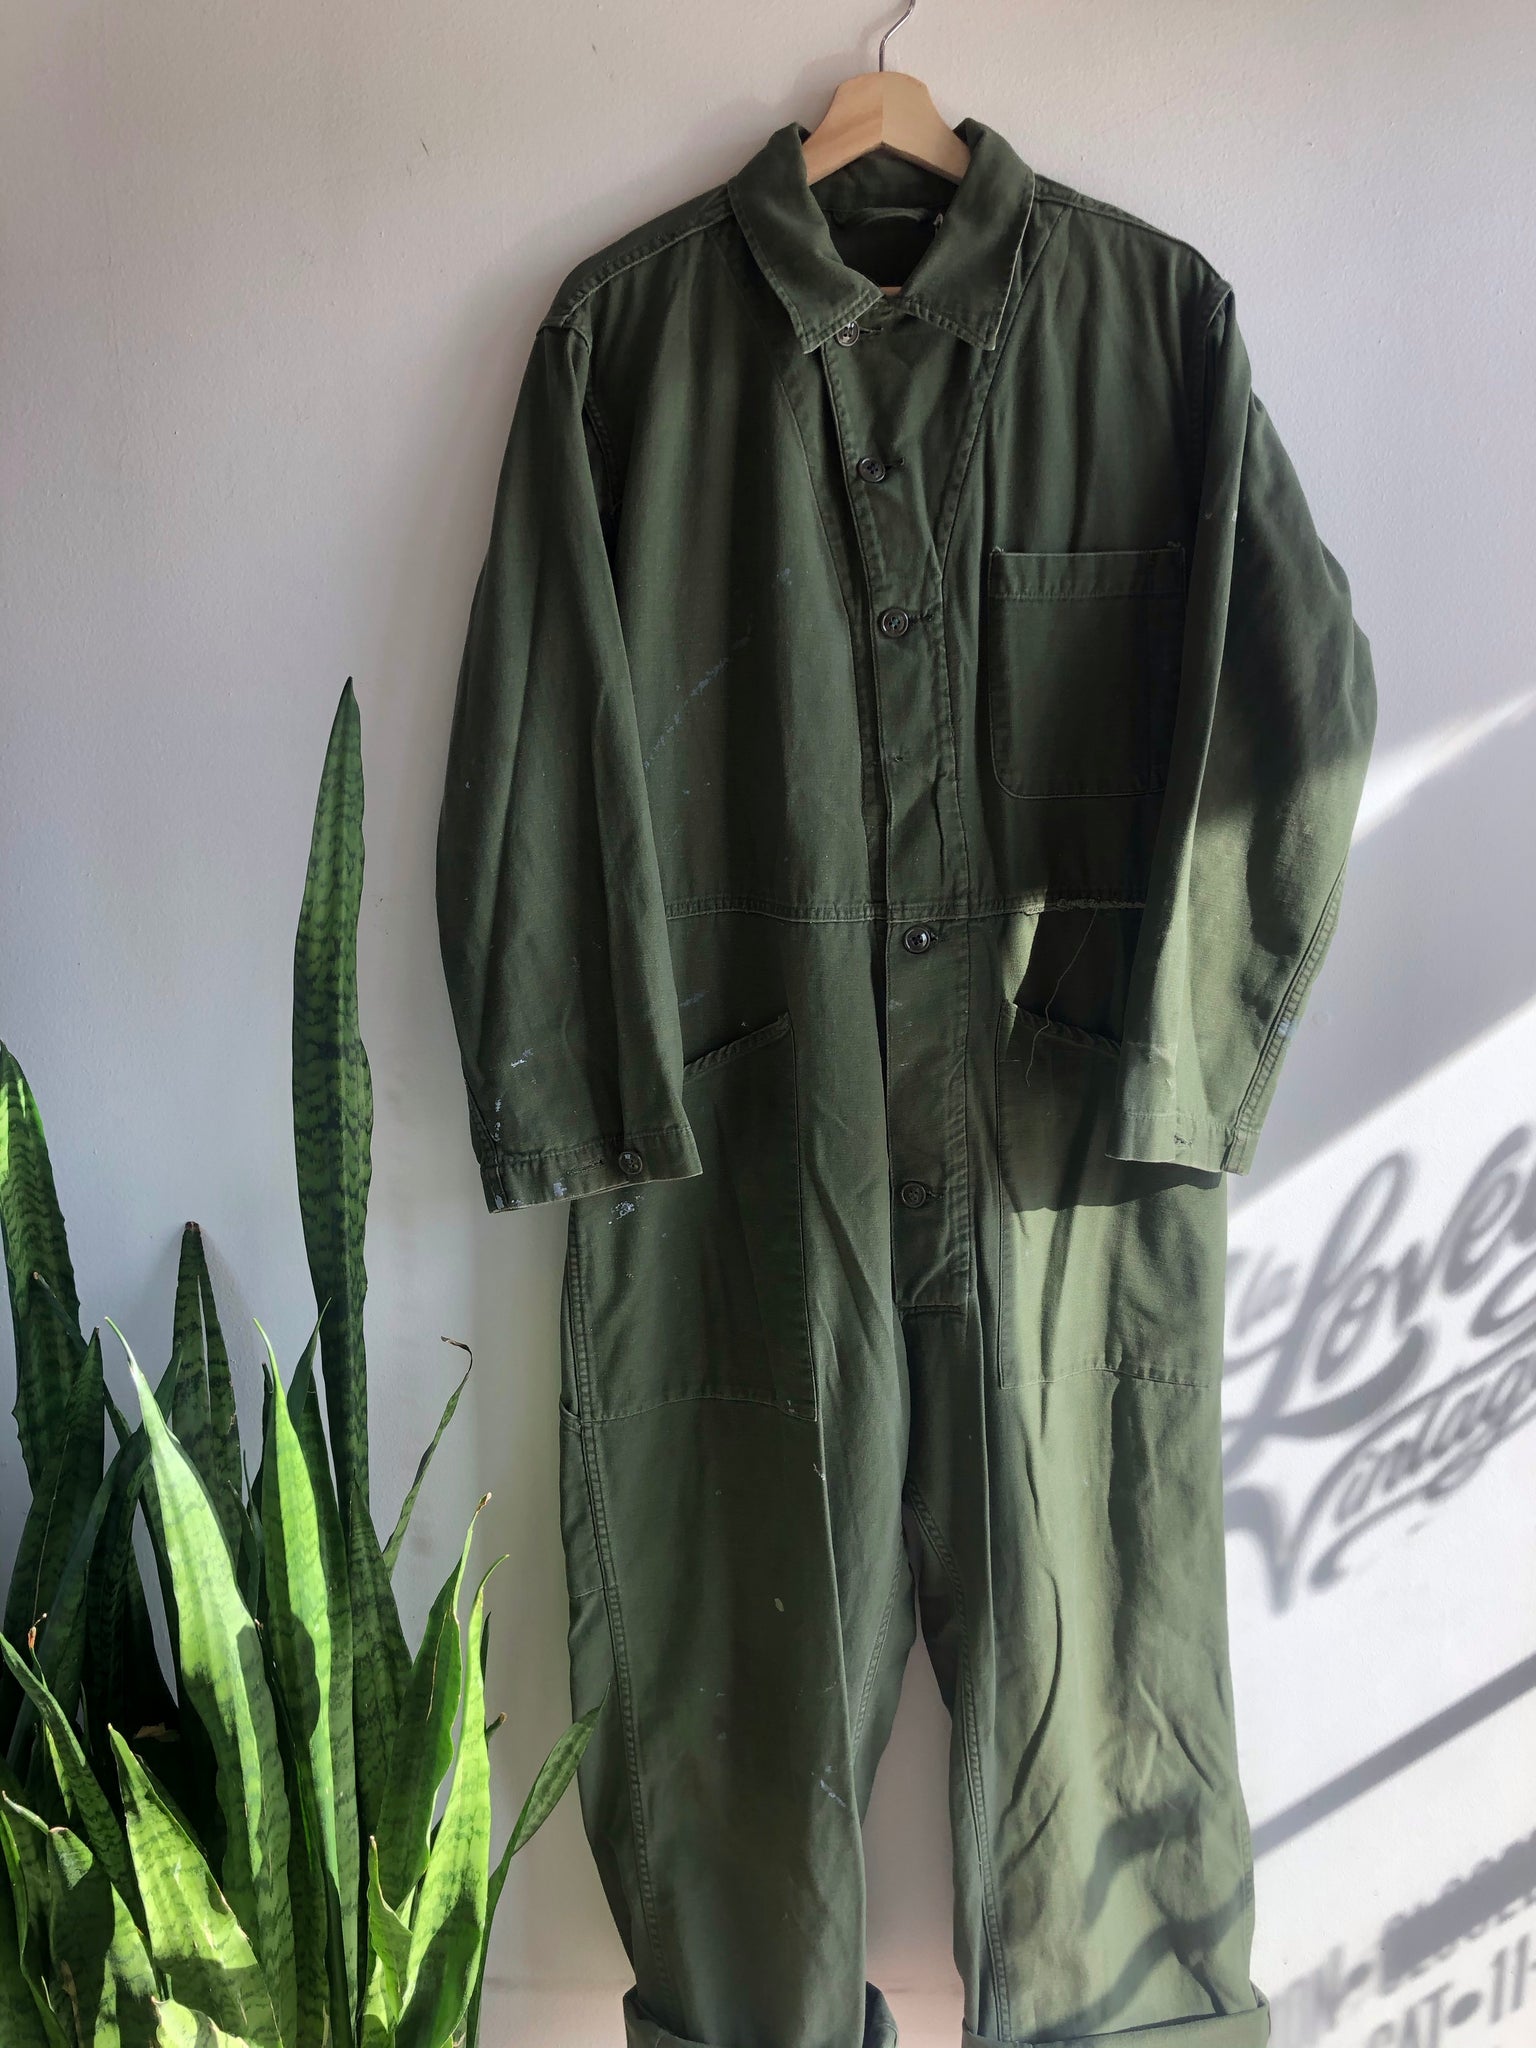 Vintage 1960s/1970s Army Coveralls